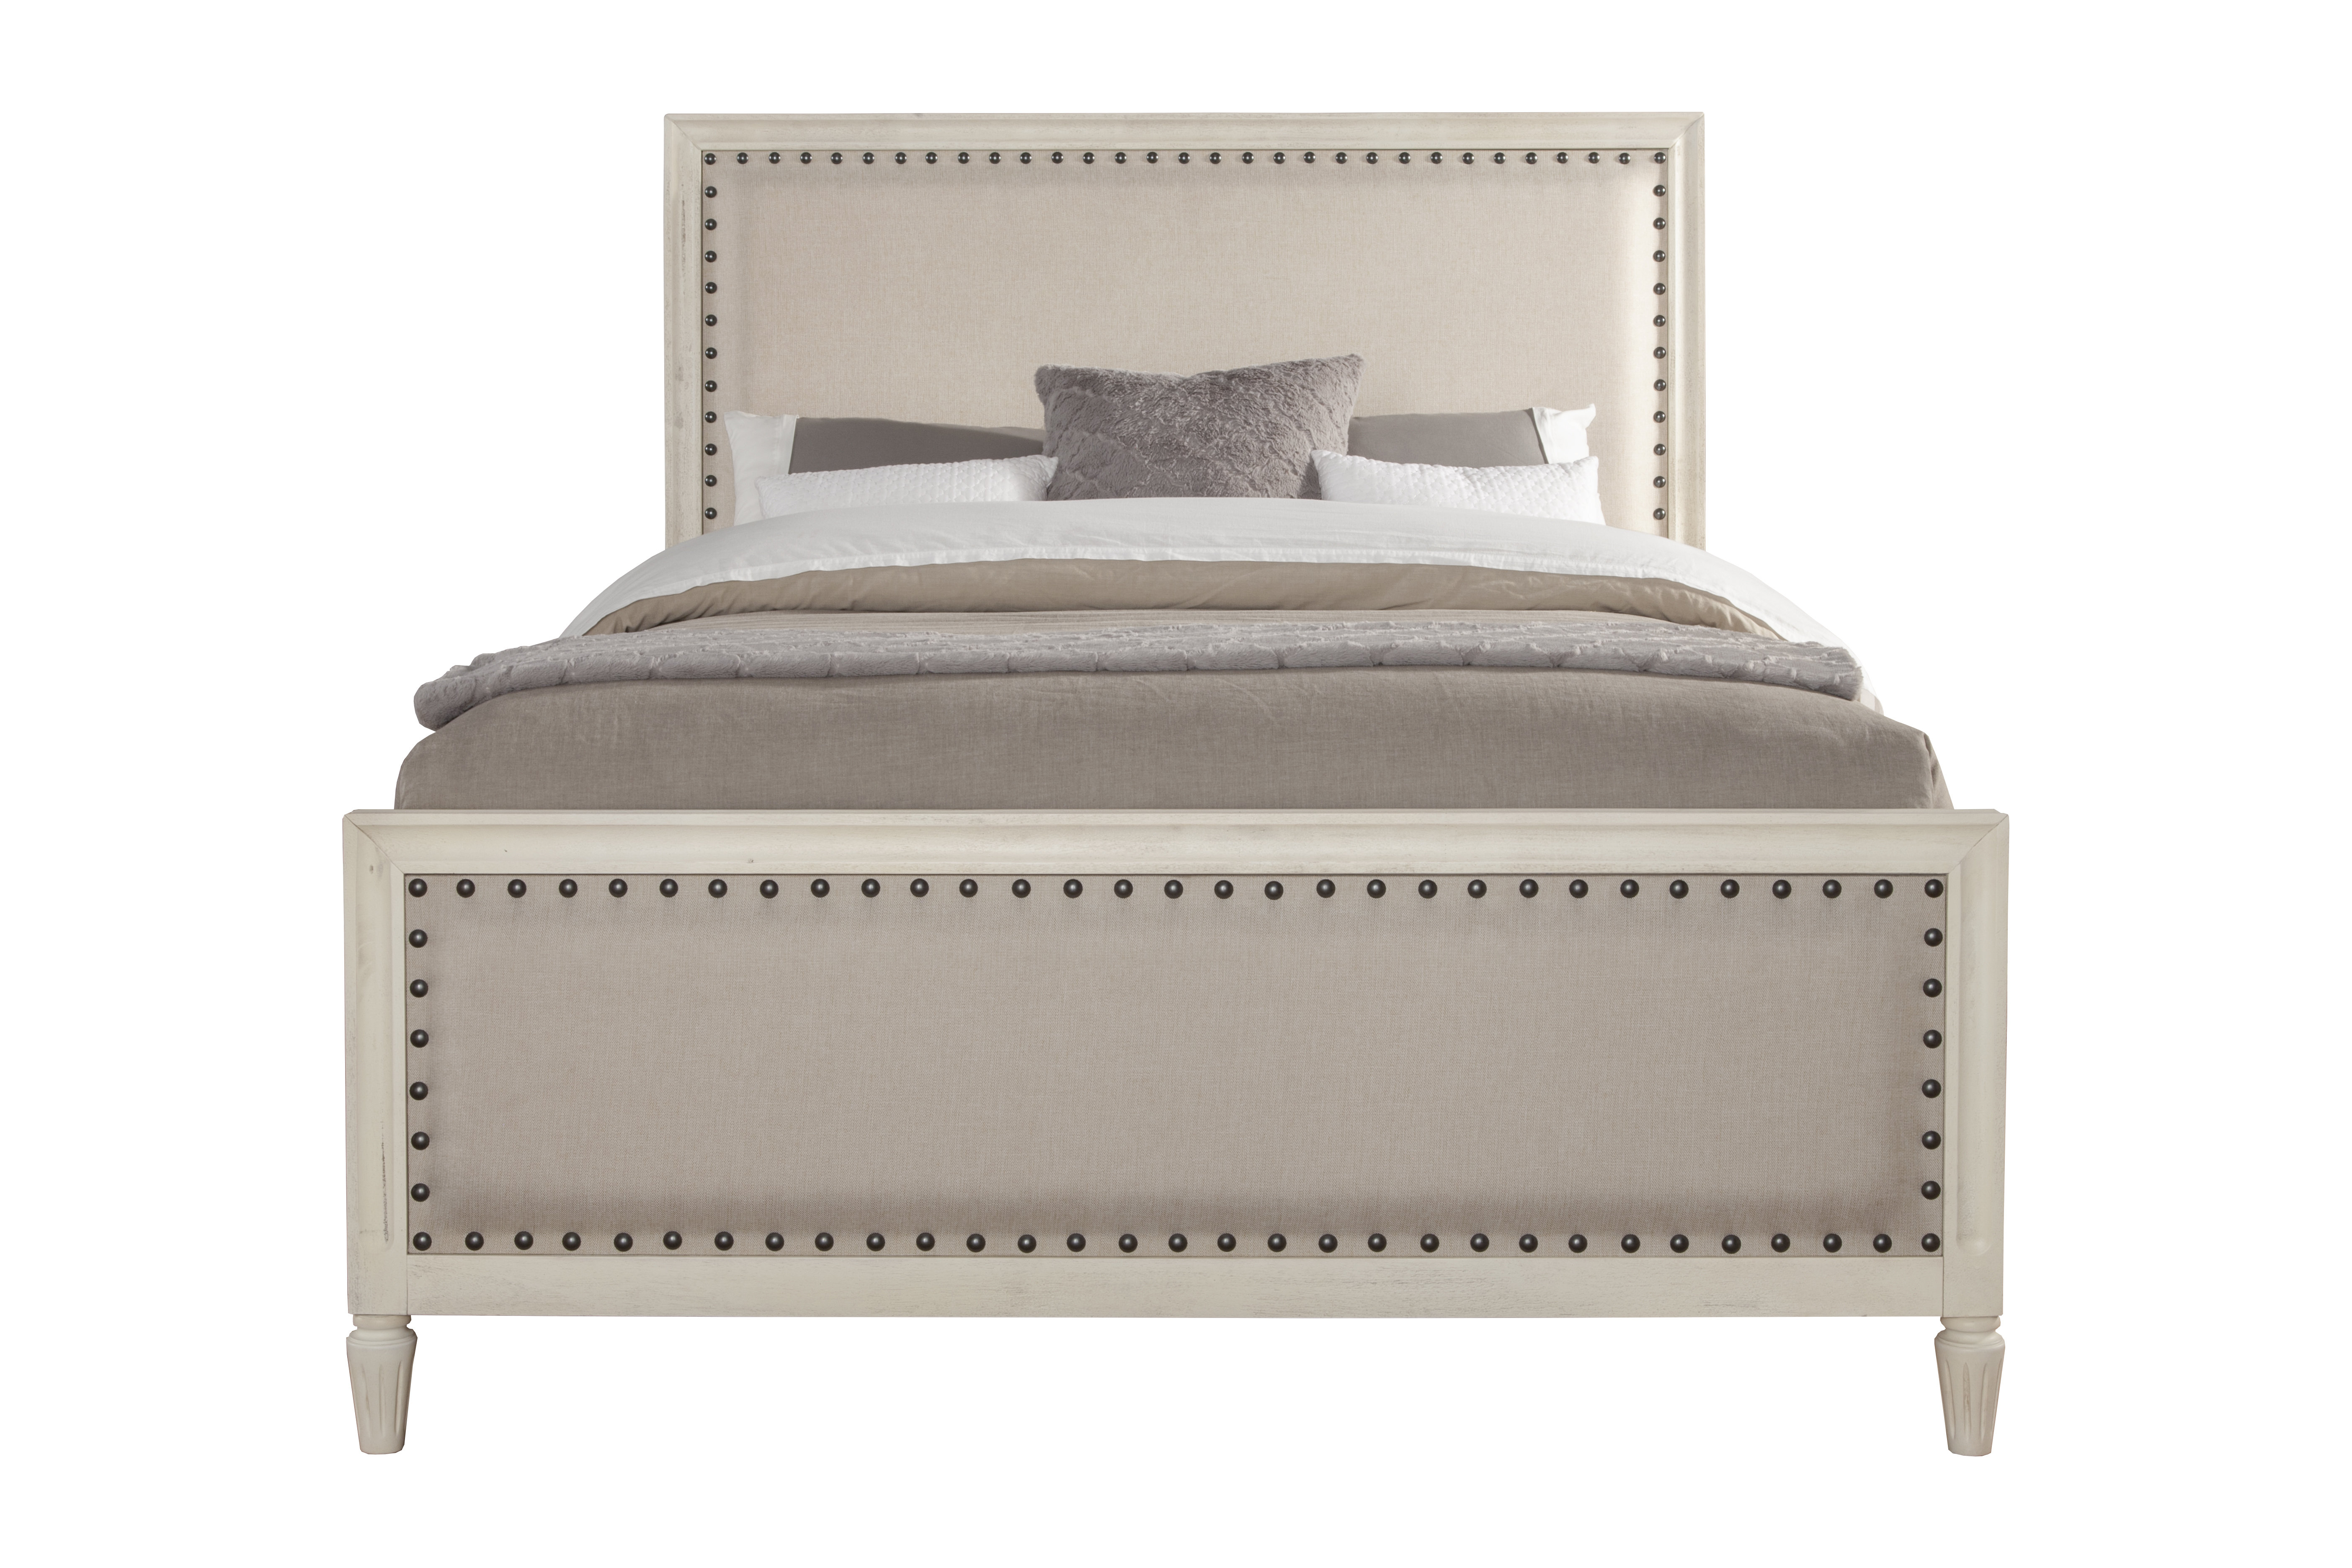 Cambridge 5 Piece King Bedroom Set With Solid Wood And Upholstered Trim In Oak Grey for proportions 5616 X 3744